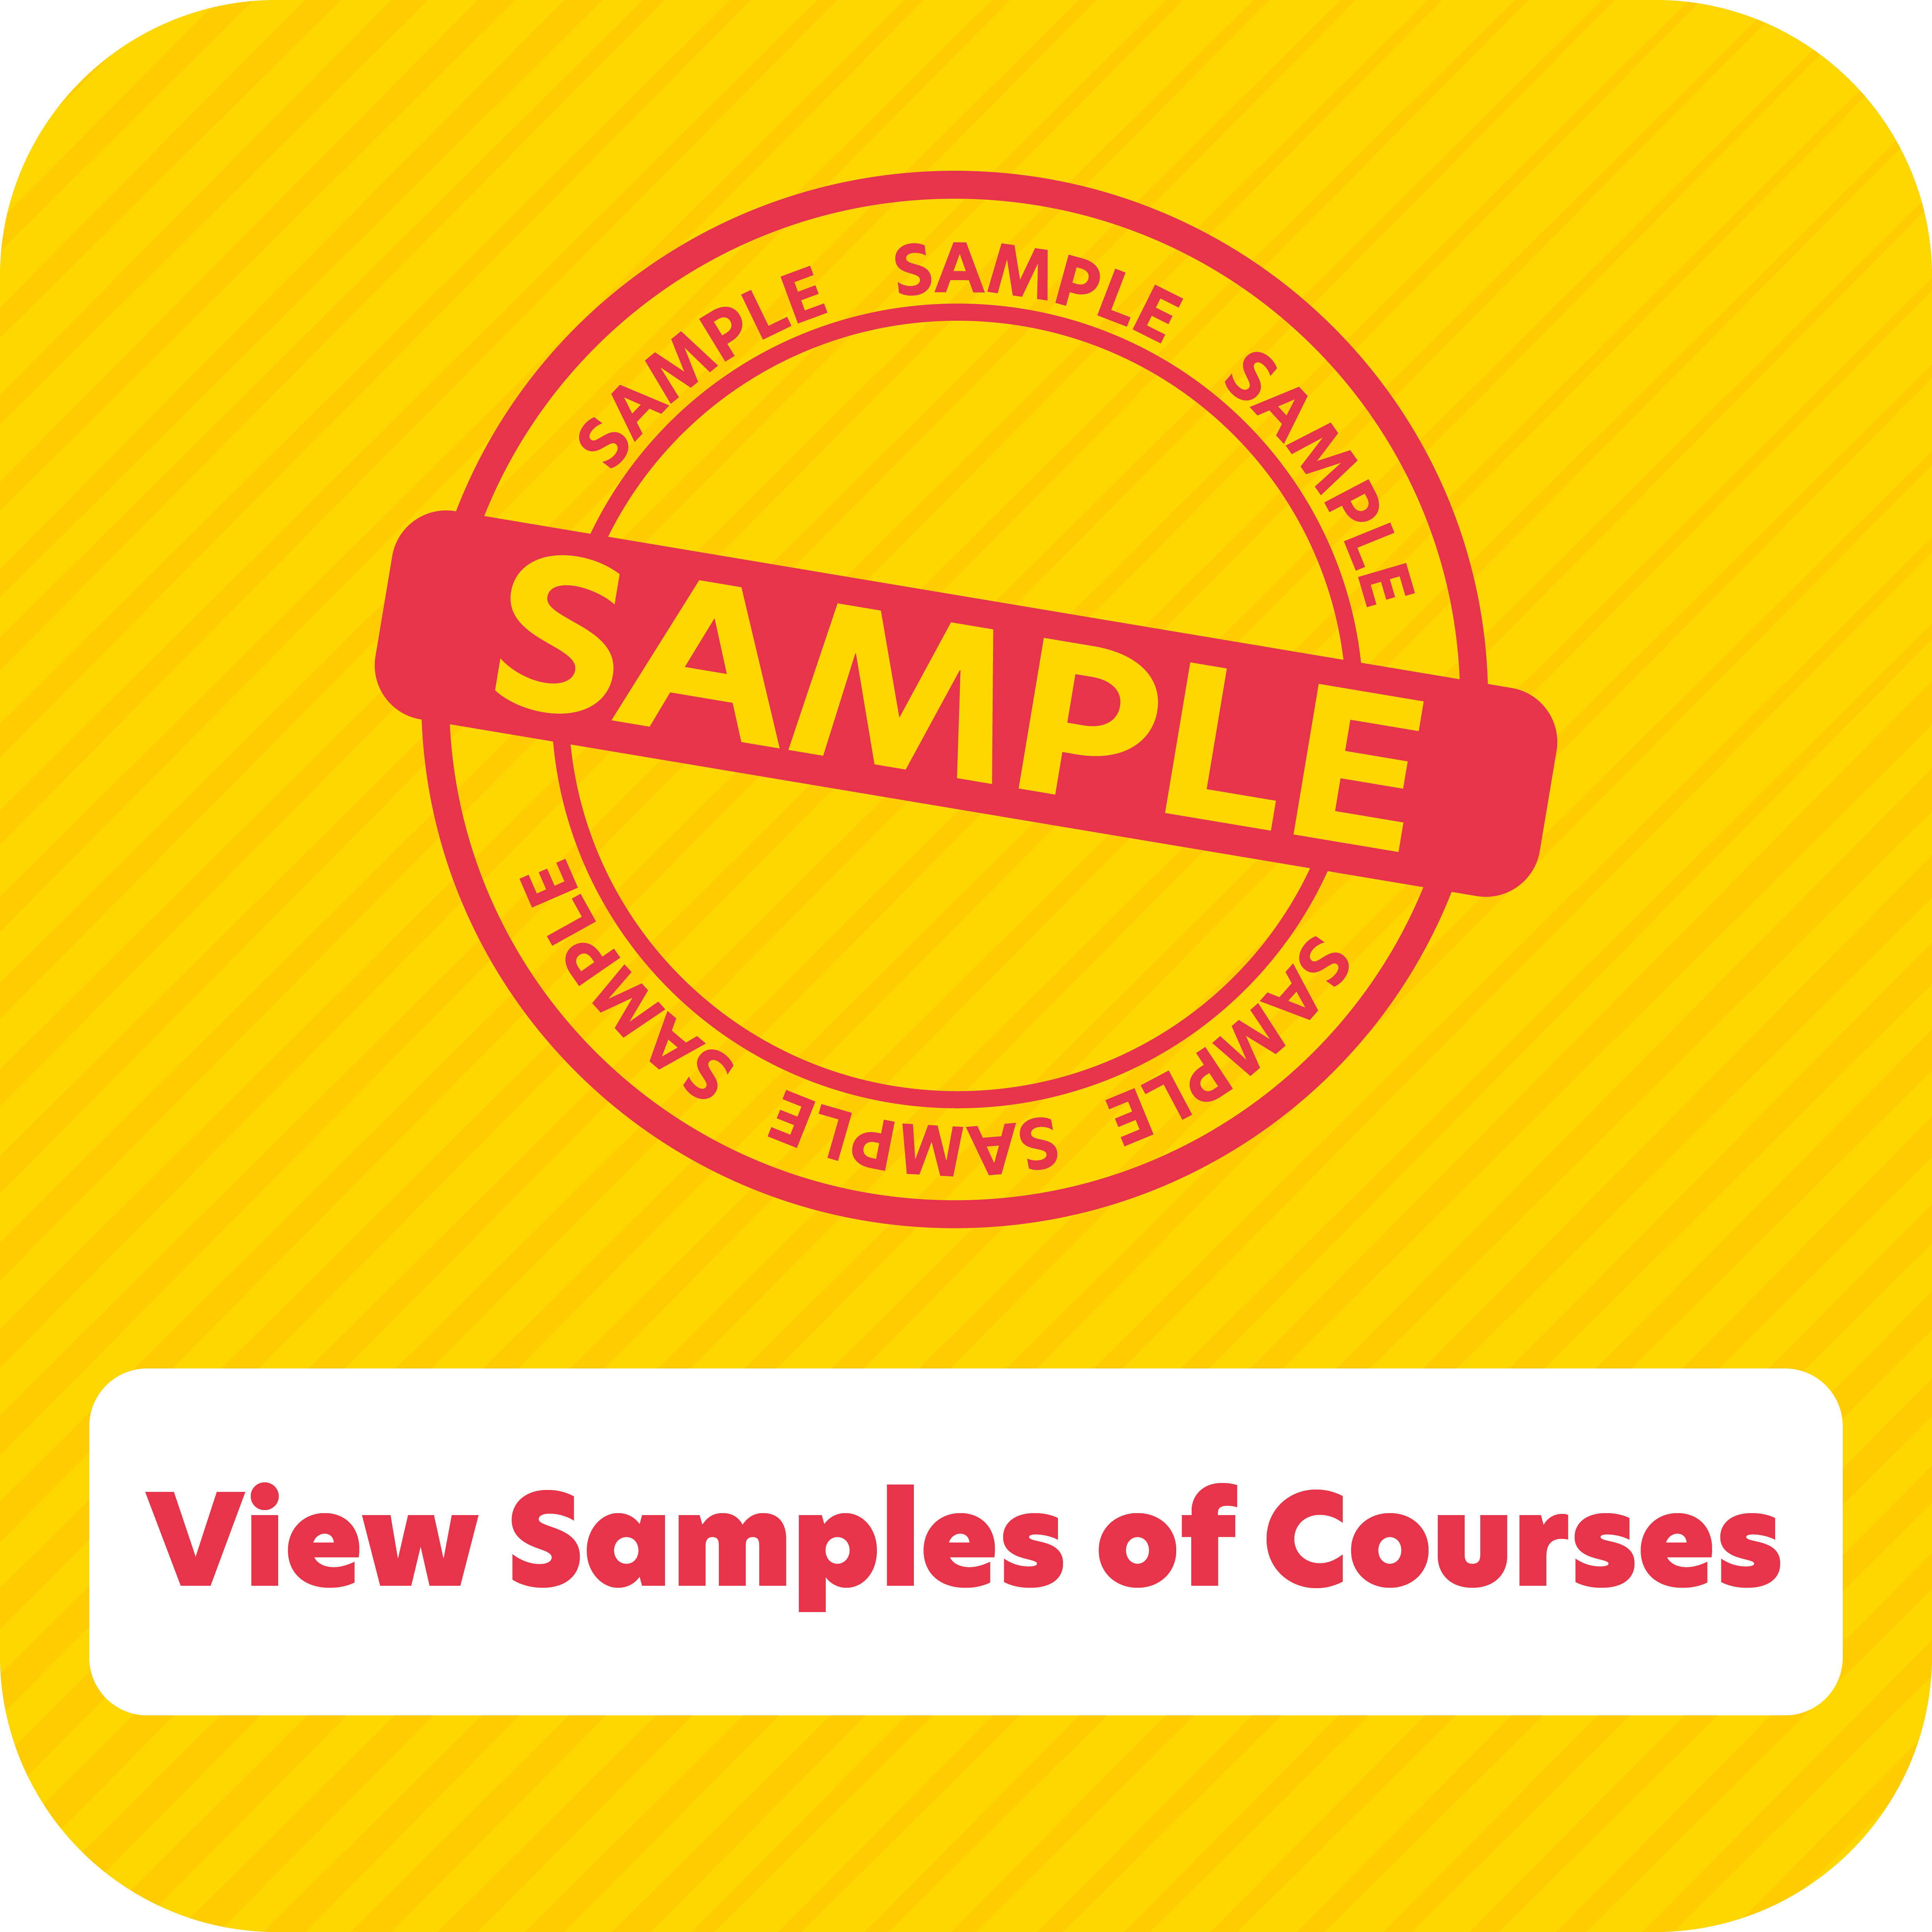 Click here to view sample courses